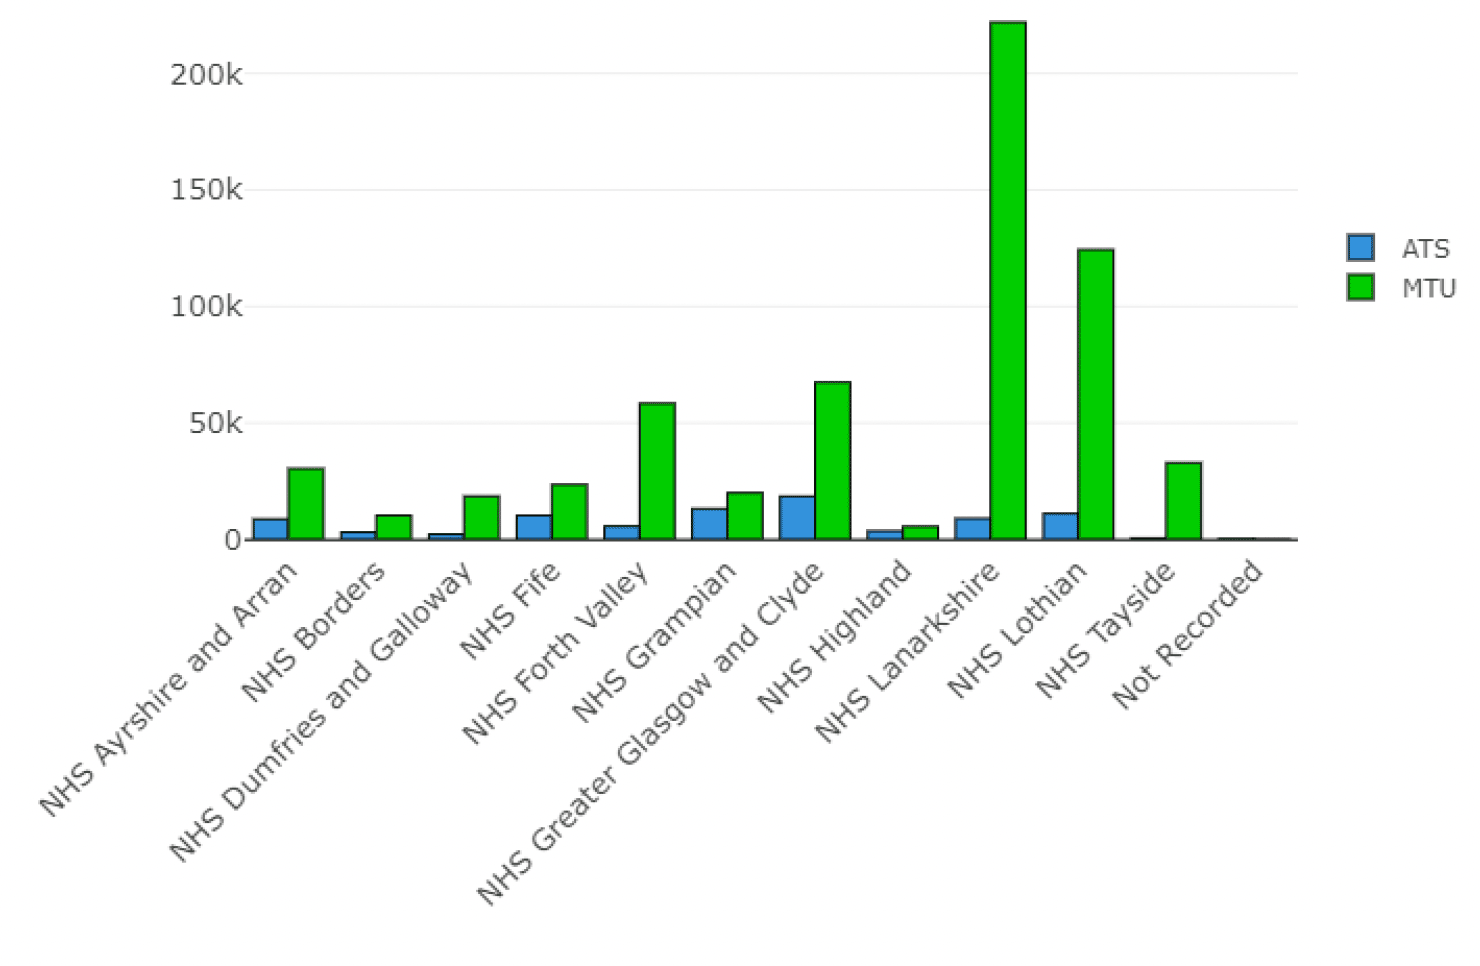 Figure 6 shows the cumulative total number of targeted community testing tests conducted within each Health Board between 18th January and 26th September 2021 by whether they were classed as via a mobile testing unit or via an asymptomatic testing site (ie LFT testing). The balance between MTU and ATS testing varies between the boards, but for every health board the chart shows that proportionately more testing was carried out via MTU than ATS.